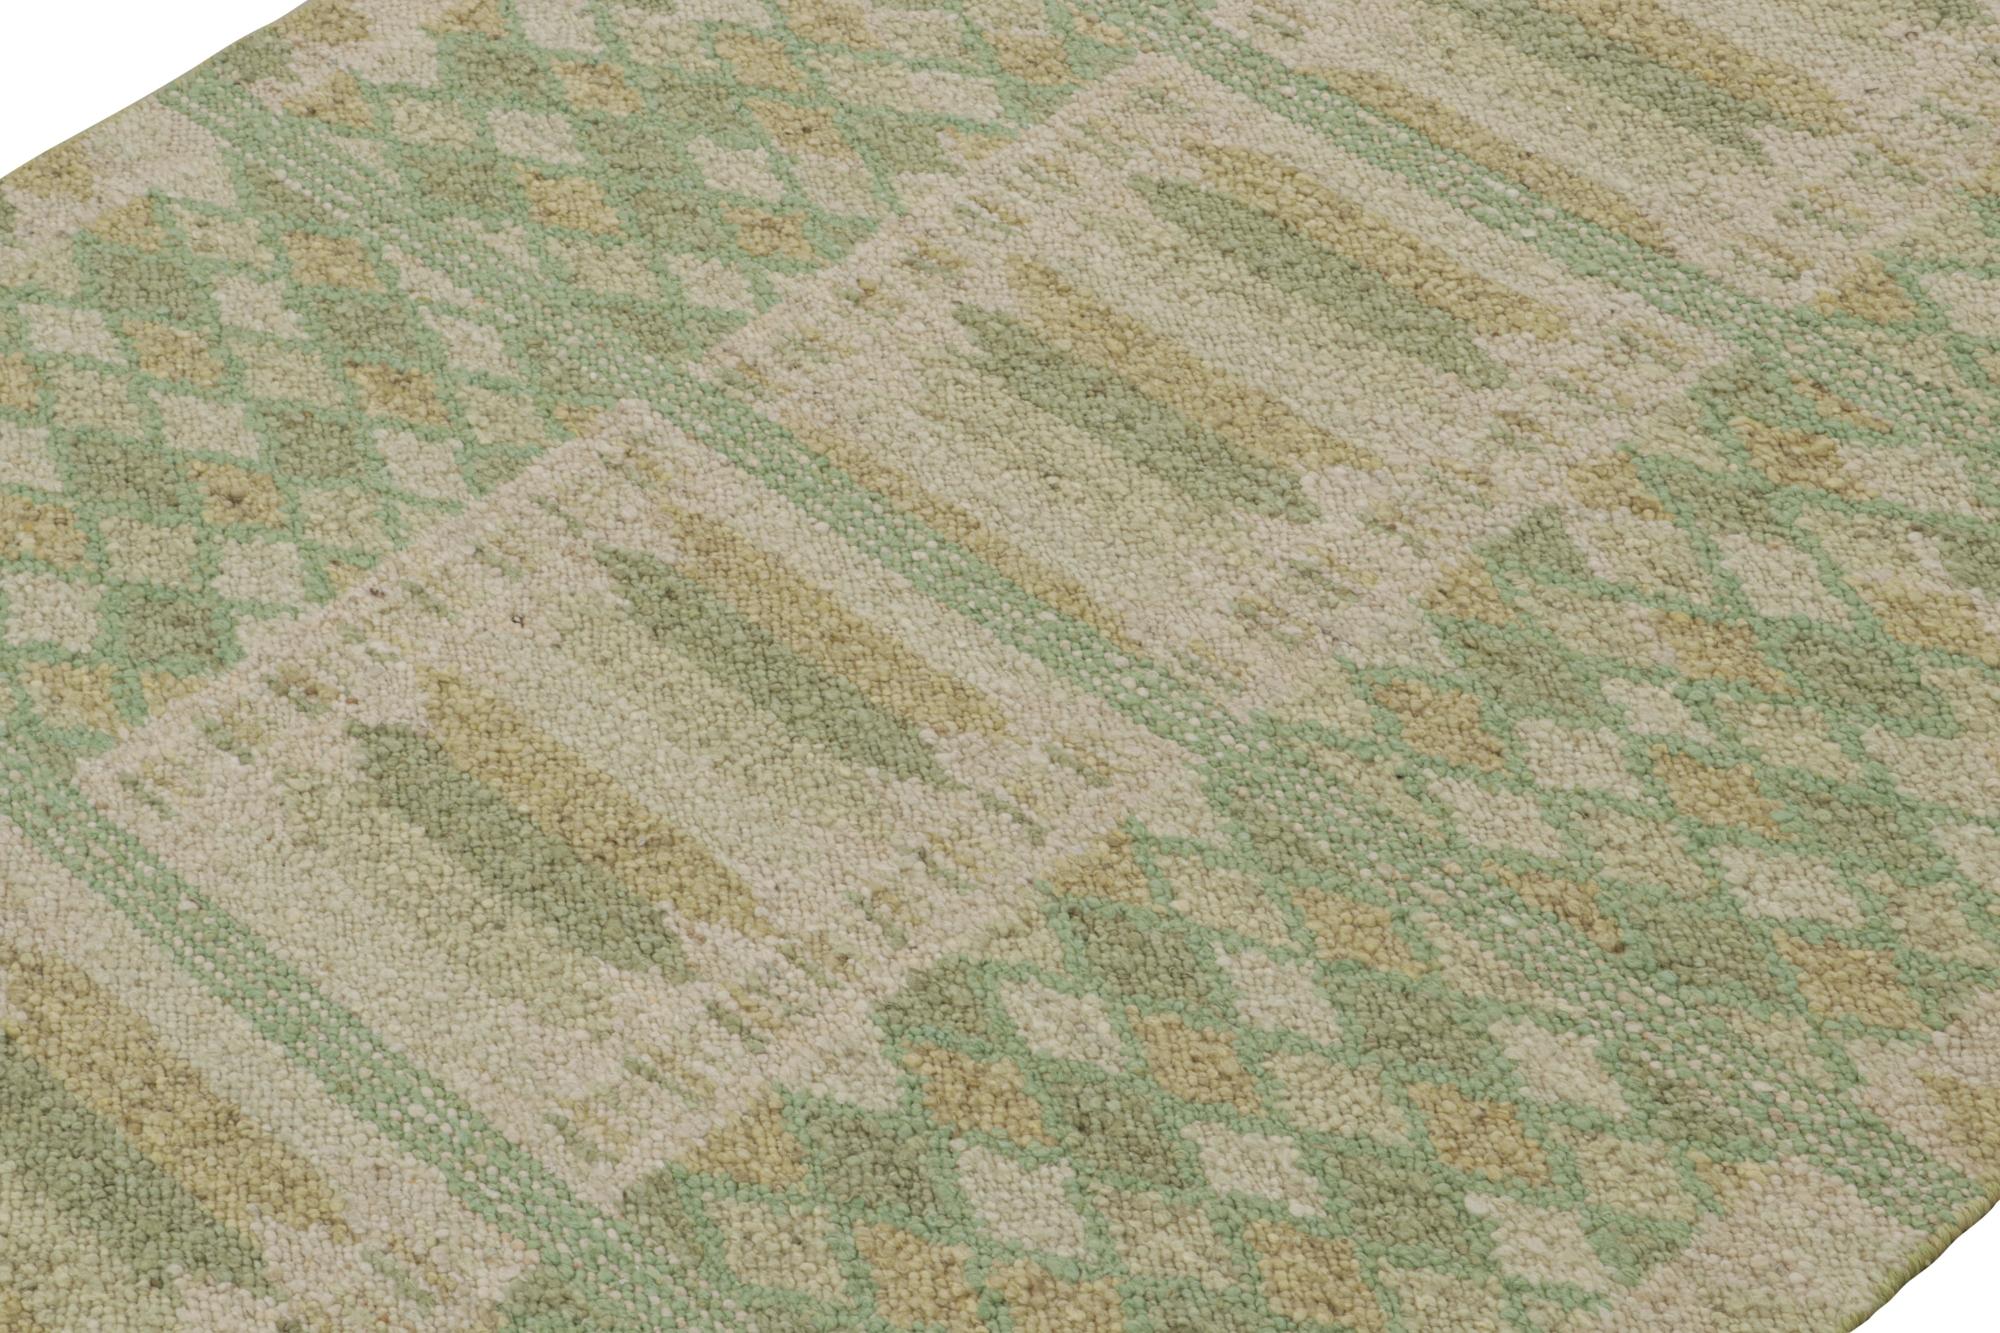 This 6x8 Swedish style kilim is from the inventive “Nu” texture in Rug & Kilim’s award-winning Scandinavian flat weave collection. Handwoven in wool.

Further On the Design: 

This rug enjoys a boucle-like texture of blended yarns, and a look